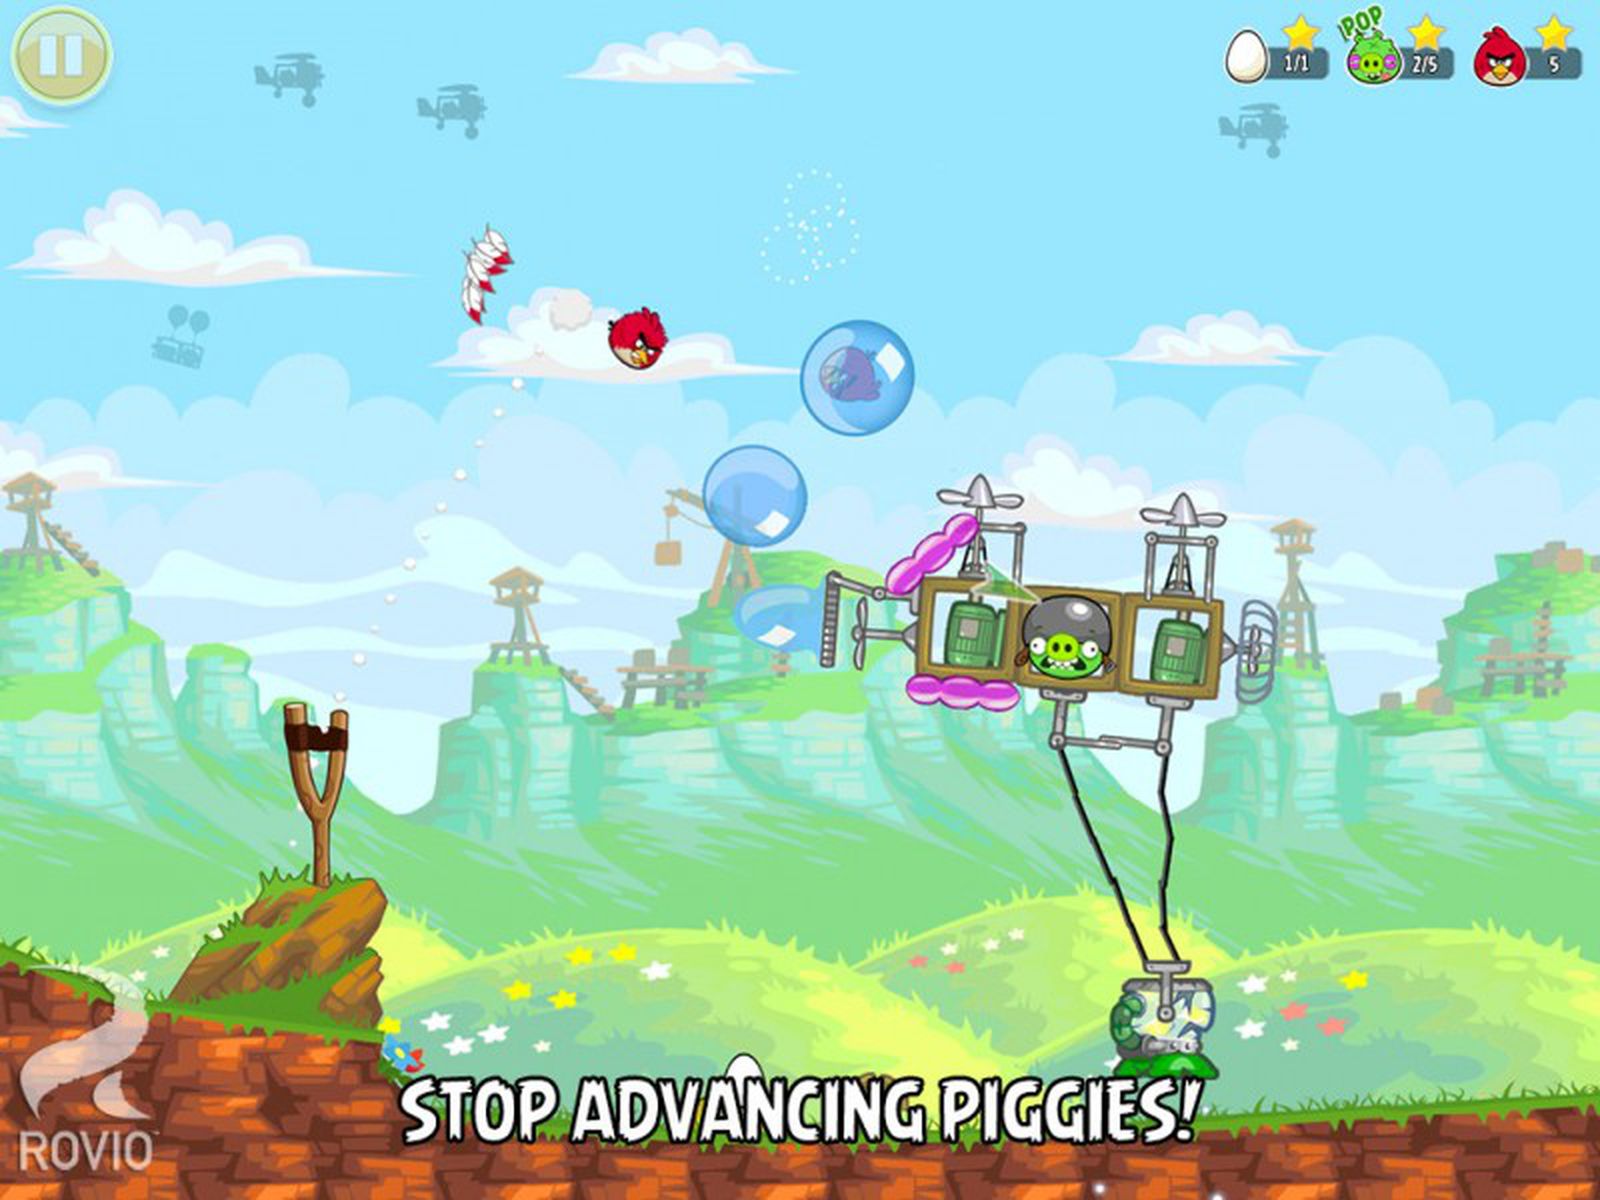 Angry Birds Epic - Walkthrough, Tips, Review